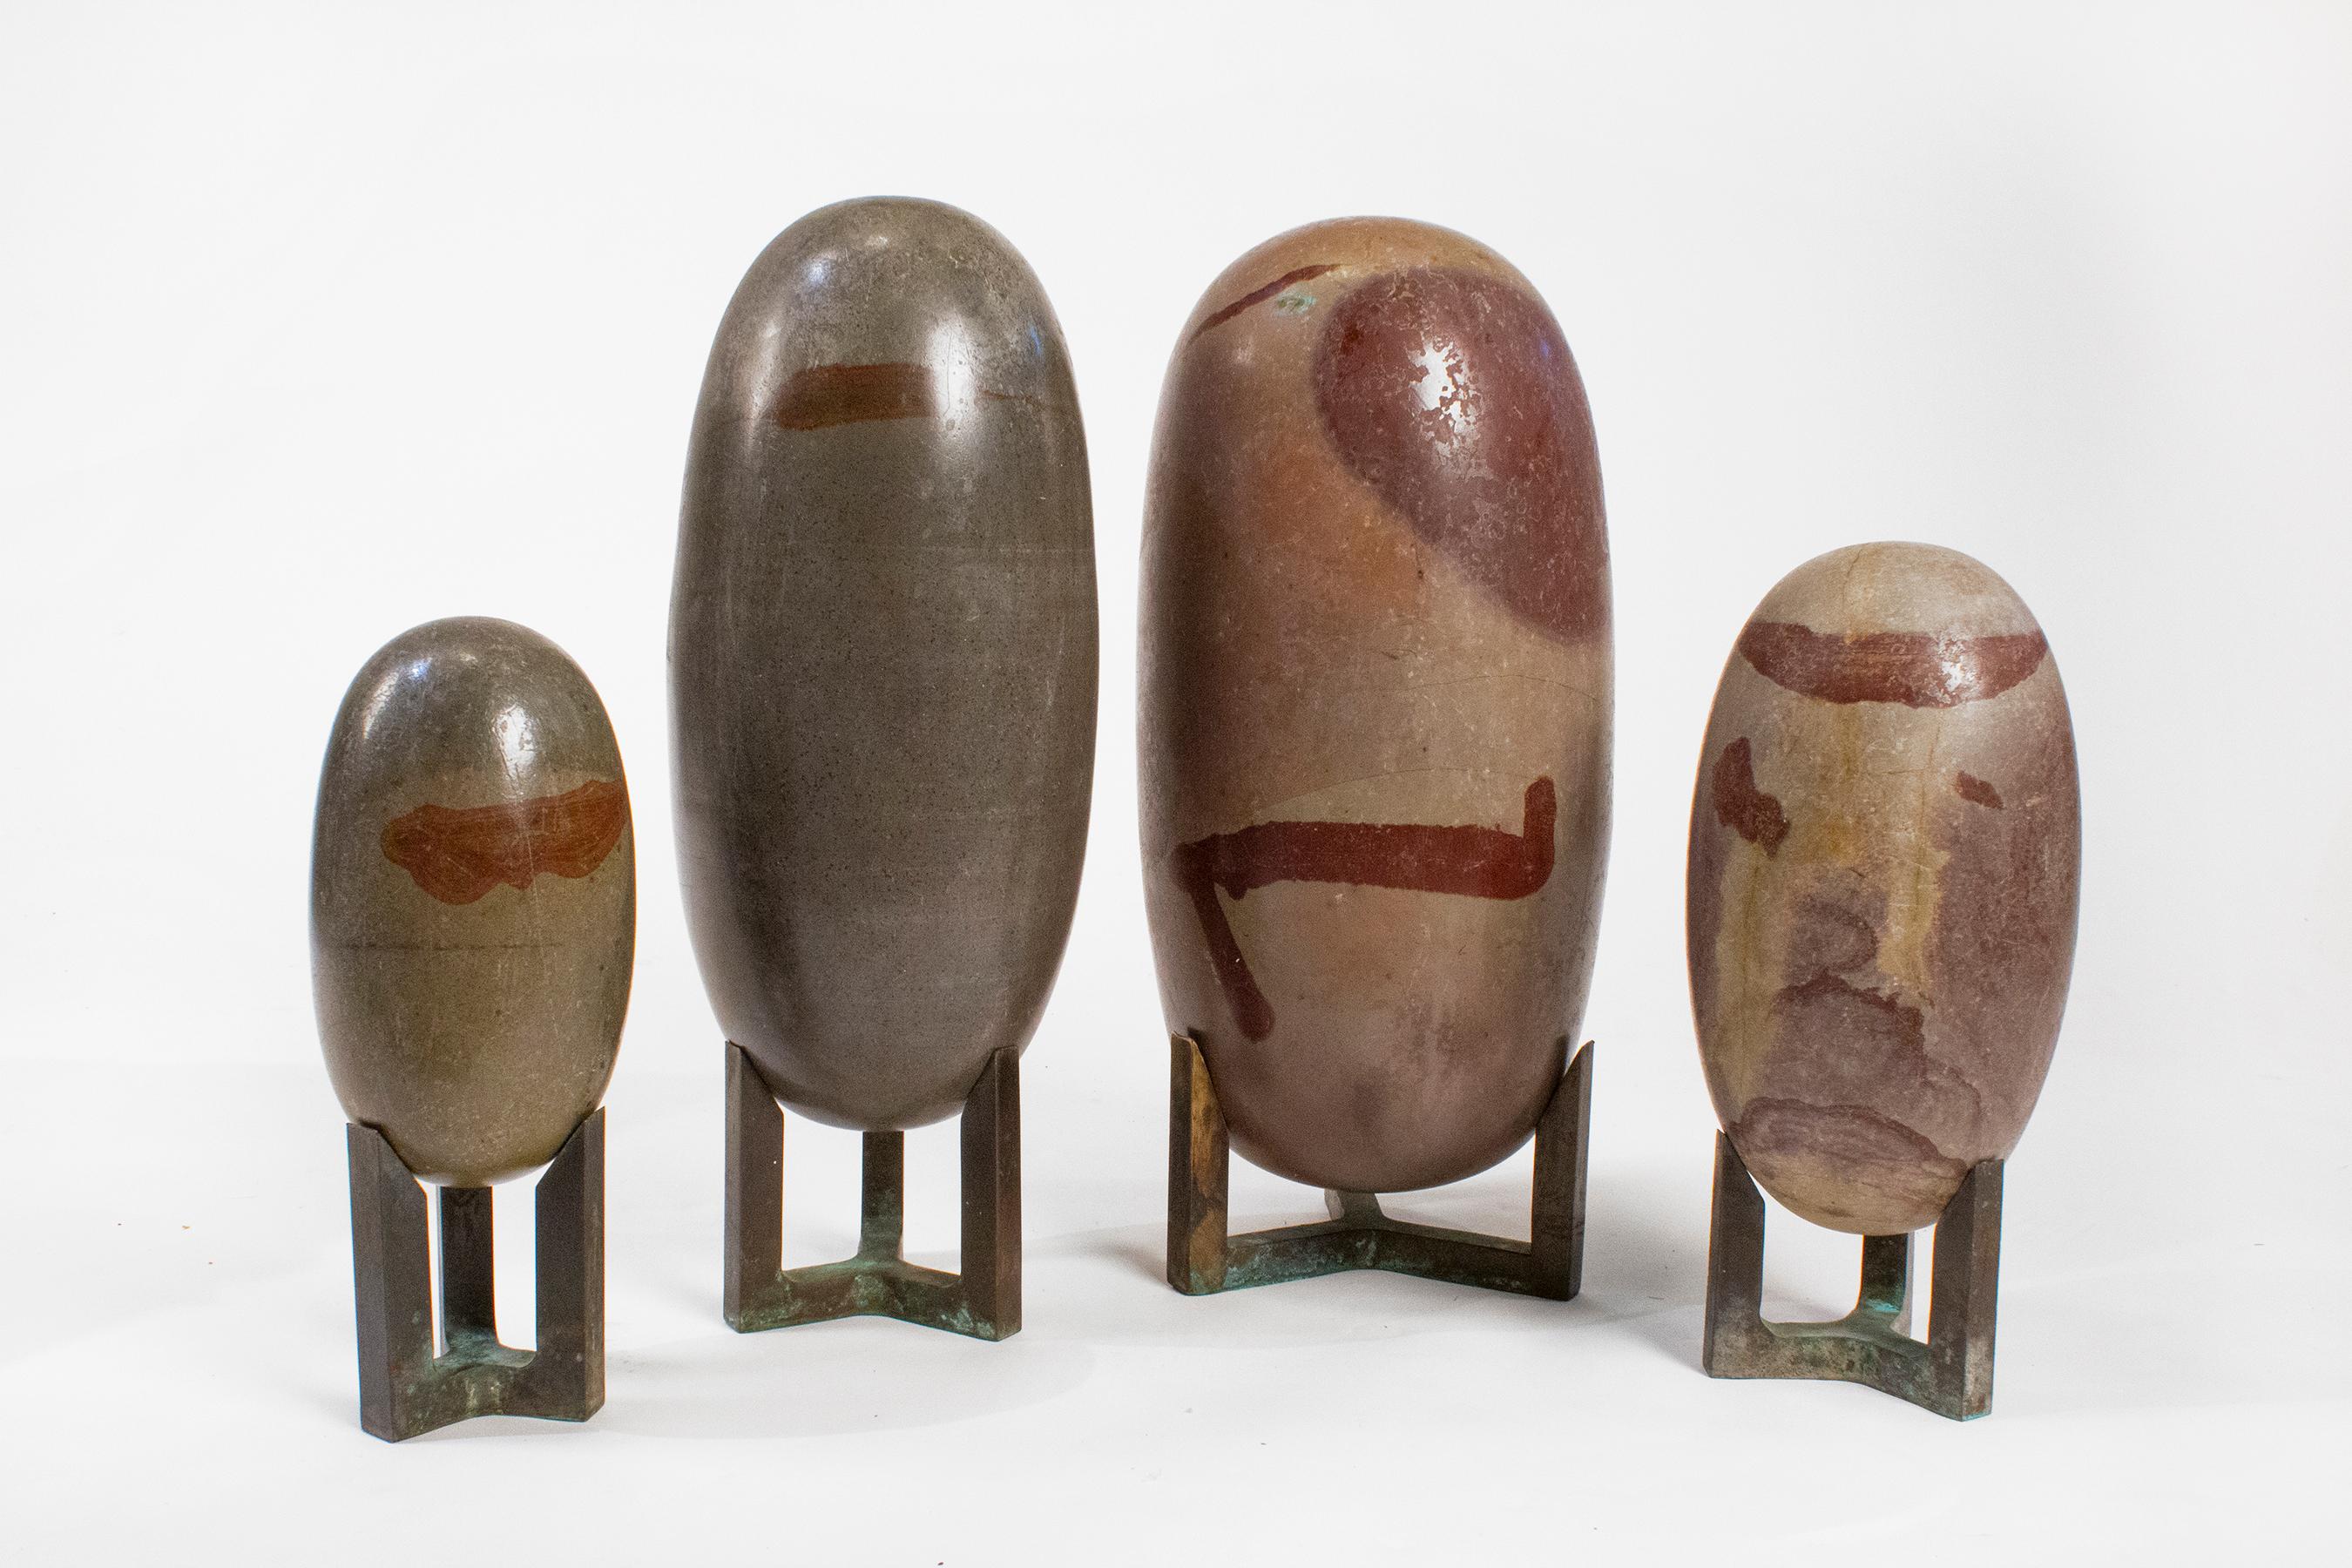 A beautiful and substantial collection of four lingam stones on bronze stands with the tallest stone measuring 18”,  from the Narmada River in India.

They are naturally formed of a mineral called CRYPTOCRYSTALLINE QUARTZ, with abstract shaped iron